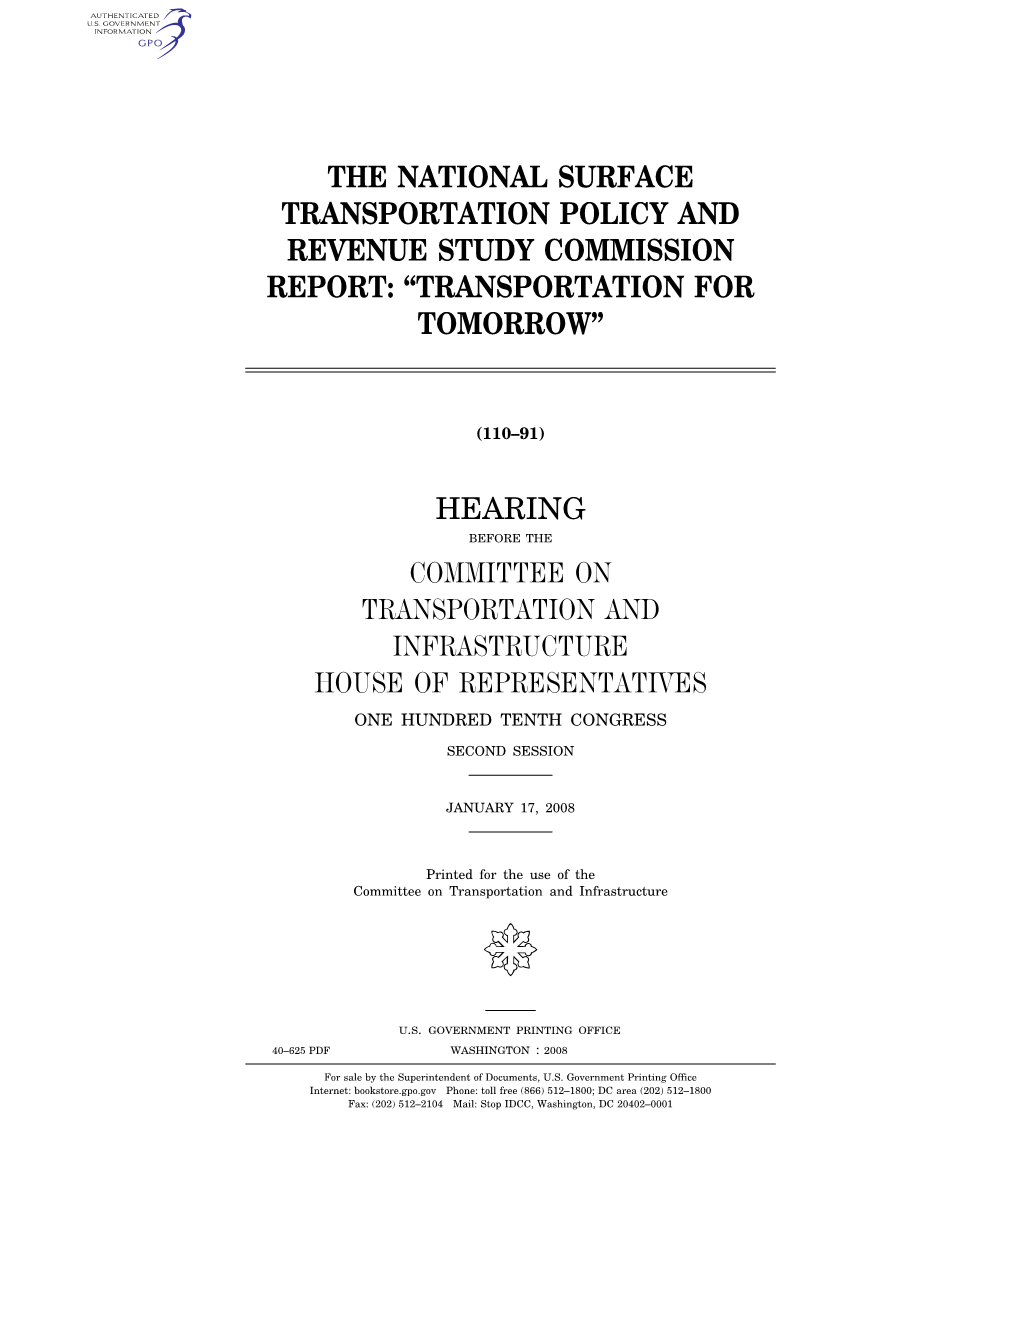 The National Surface Transportation Policy and Revenue Study Commission Report: ‘‘Transportation for Tomorrow’’